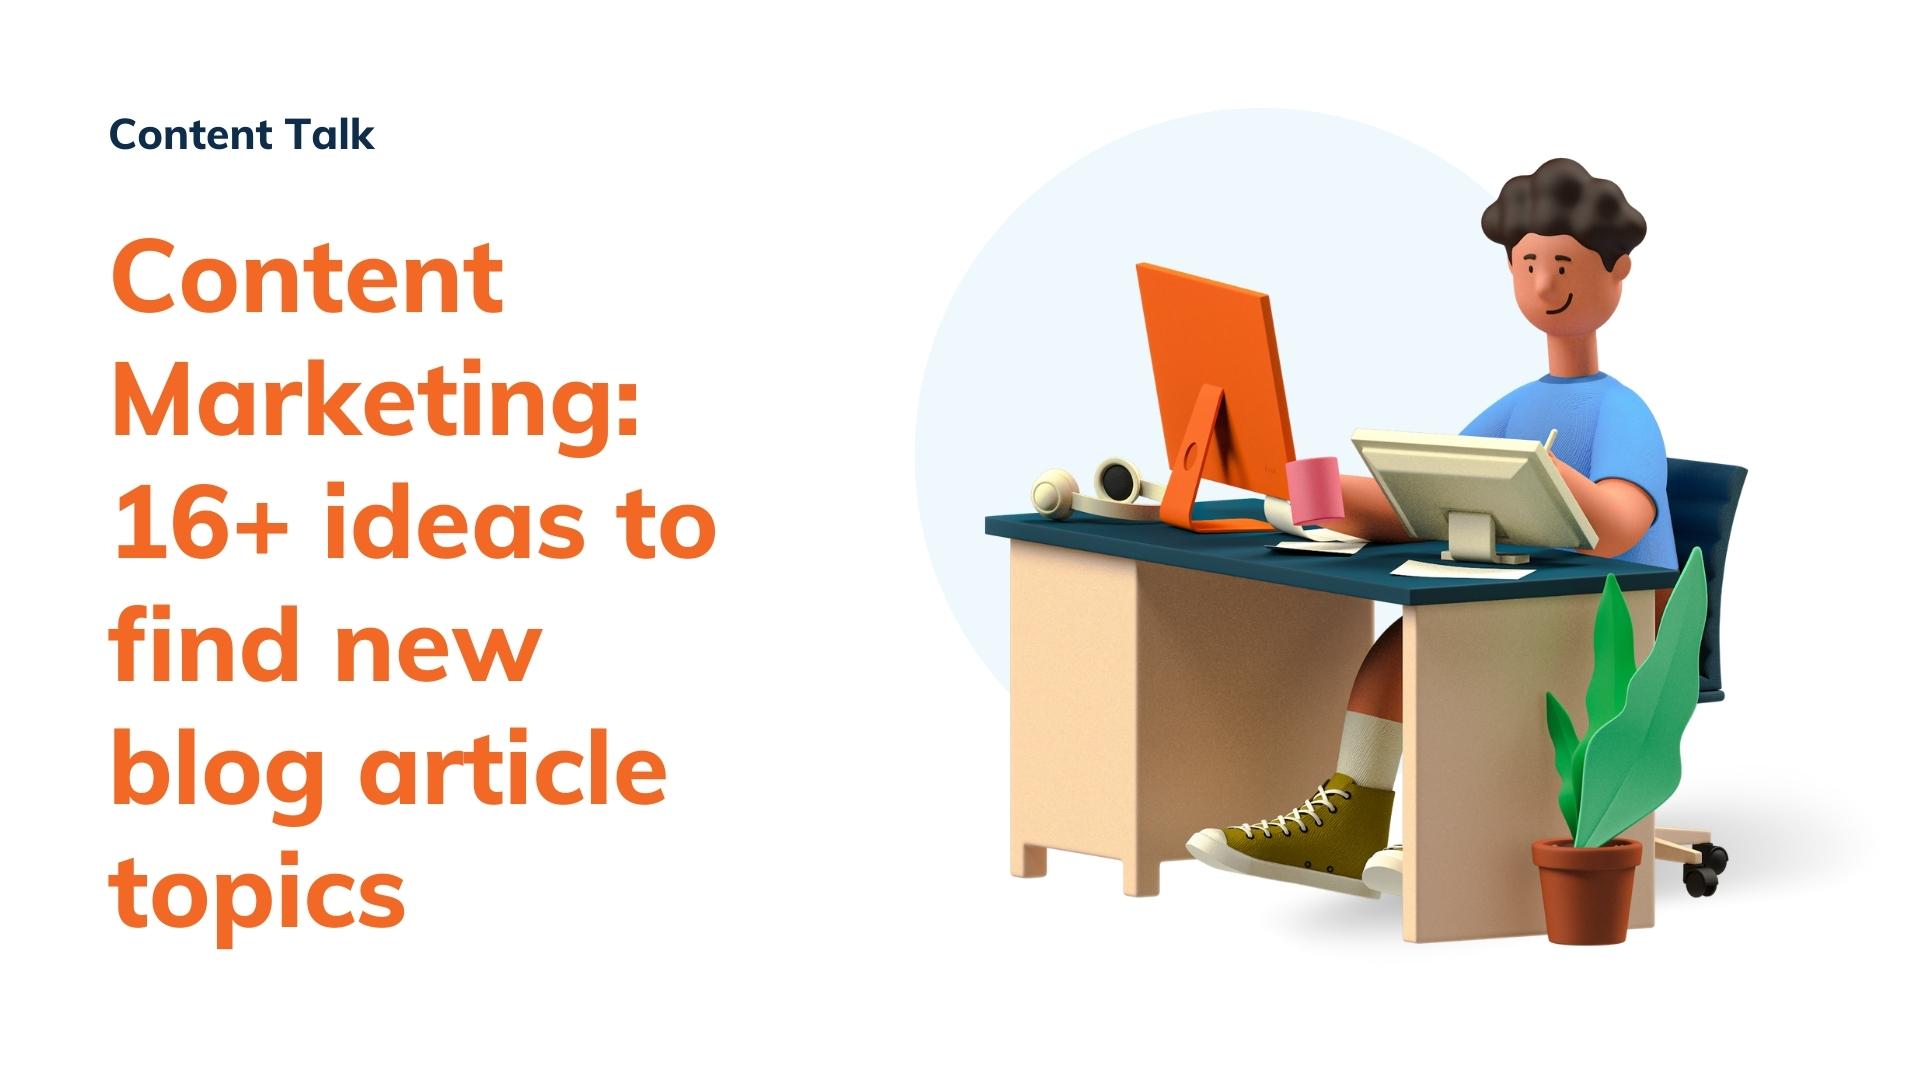 Content Marketing: 16+ ideas to find new blog article topics